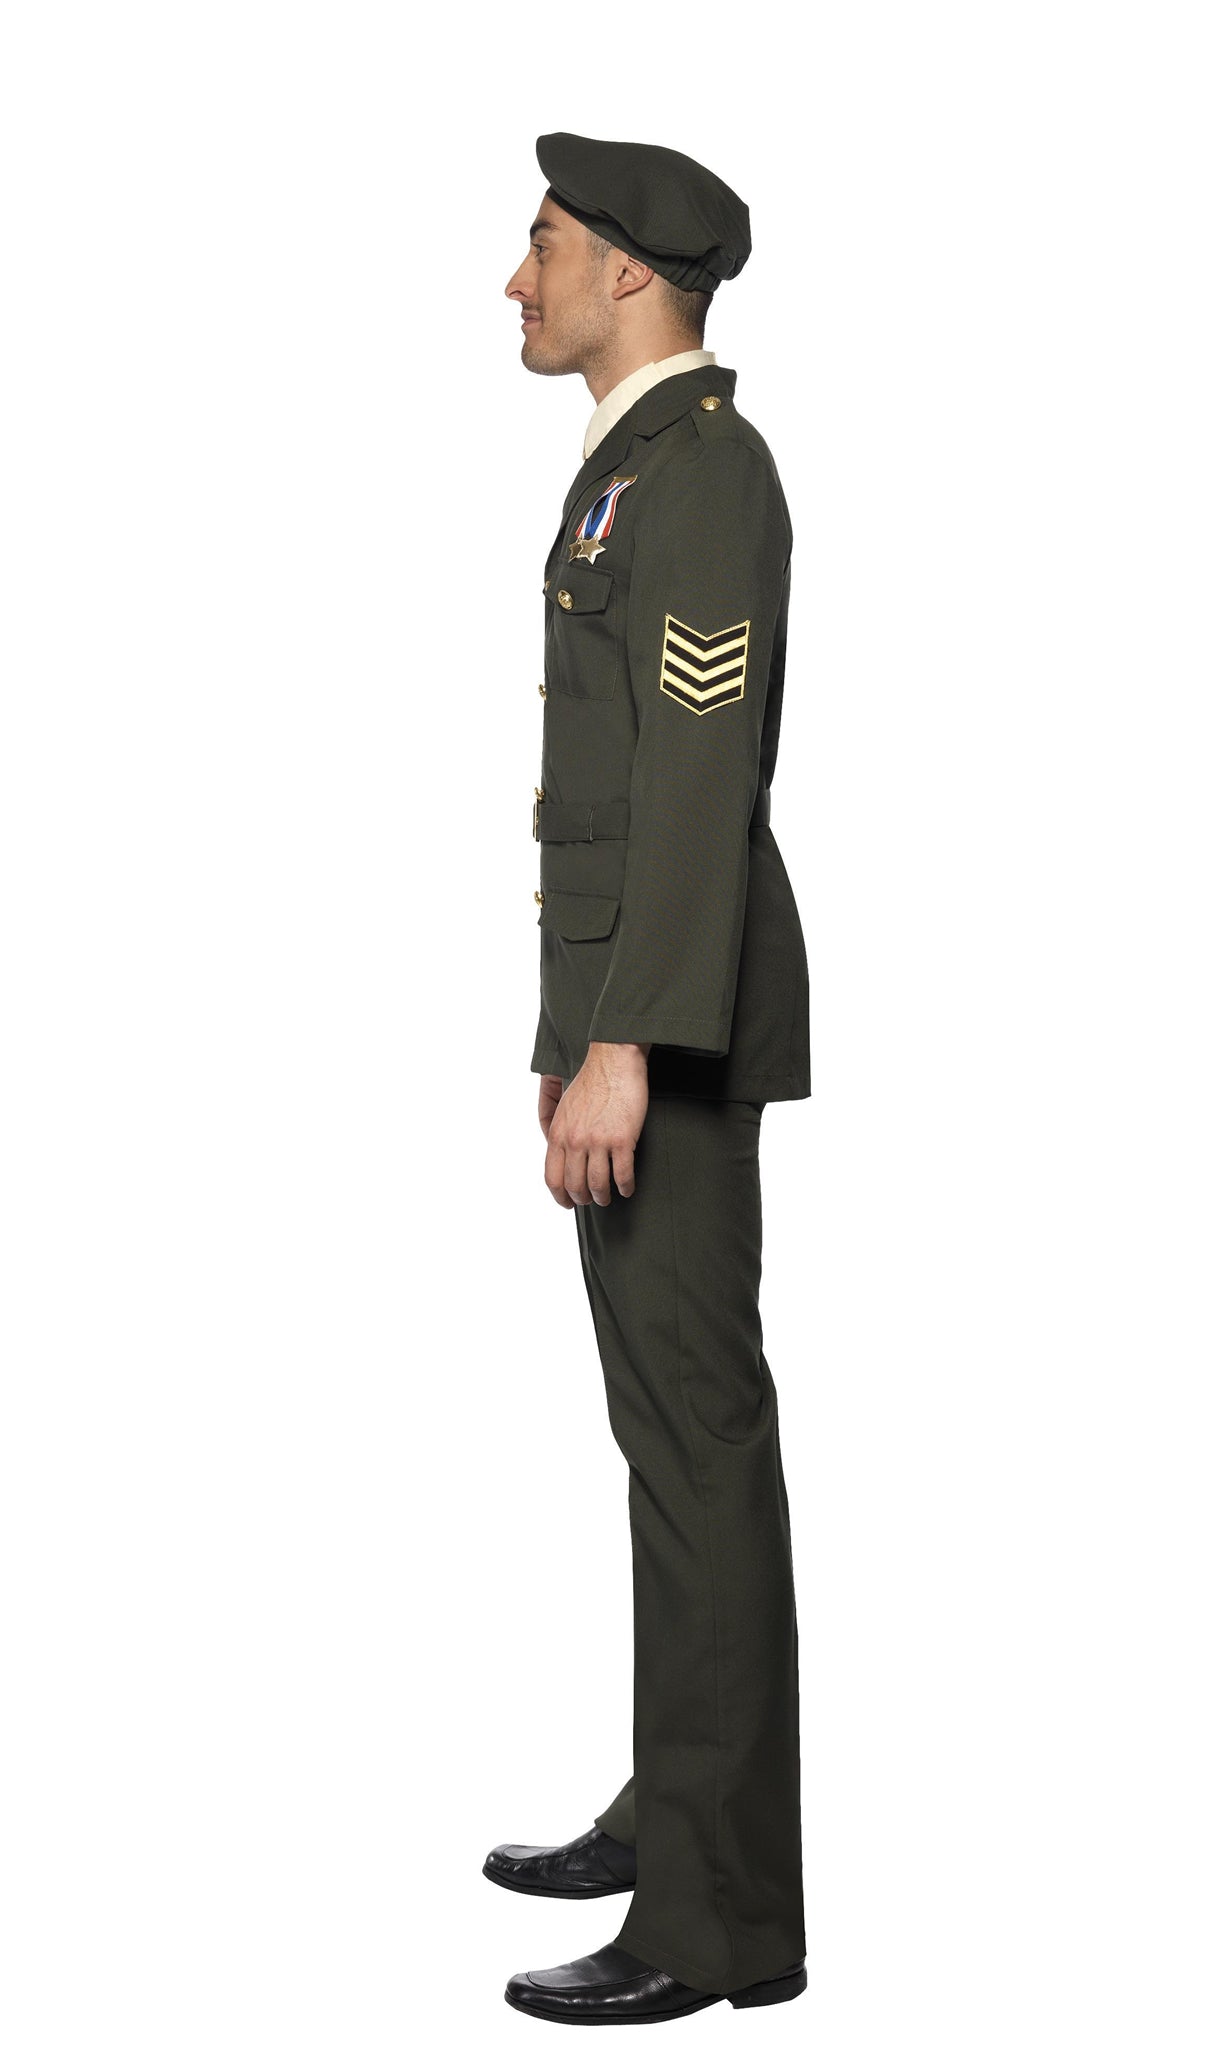 Side of green military officer costume with beret, jacket, mock shirt and tie, belt and pants